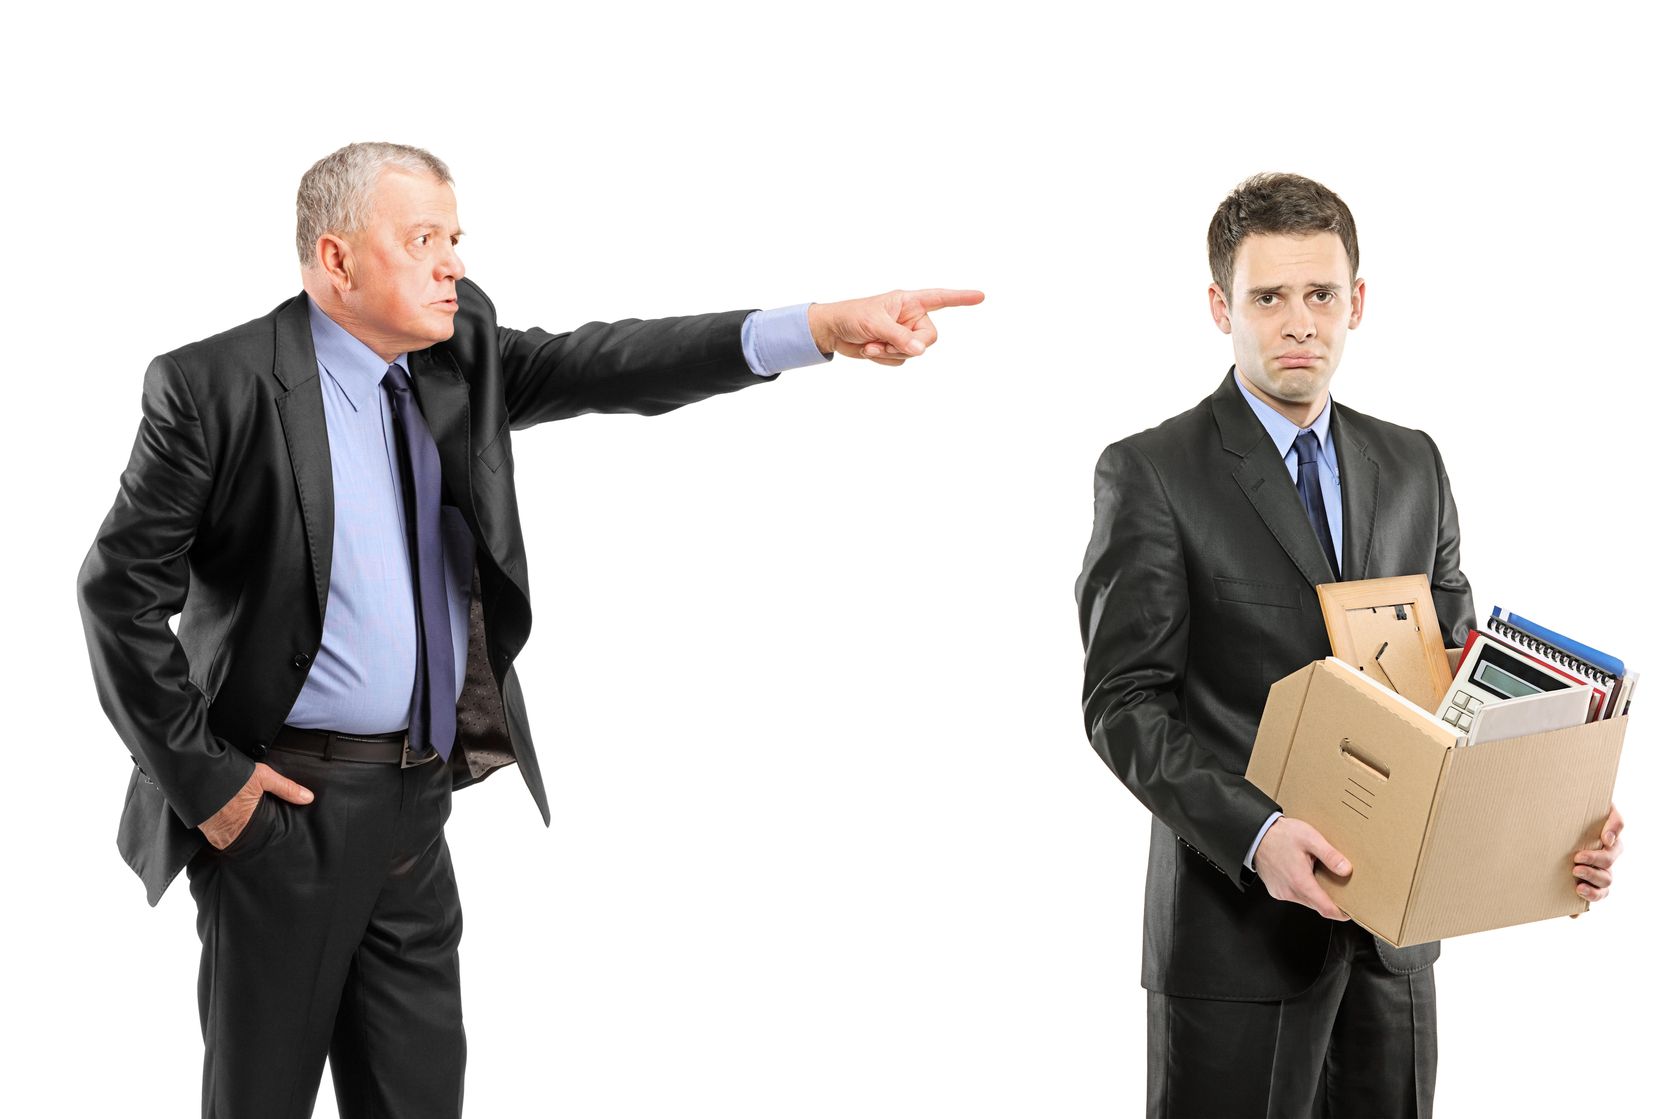 Can I Be Fired For Making A Personal Injury Claim Against My Employer